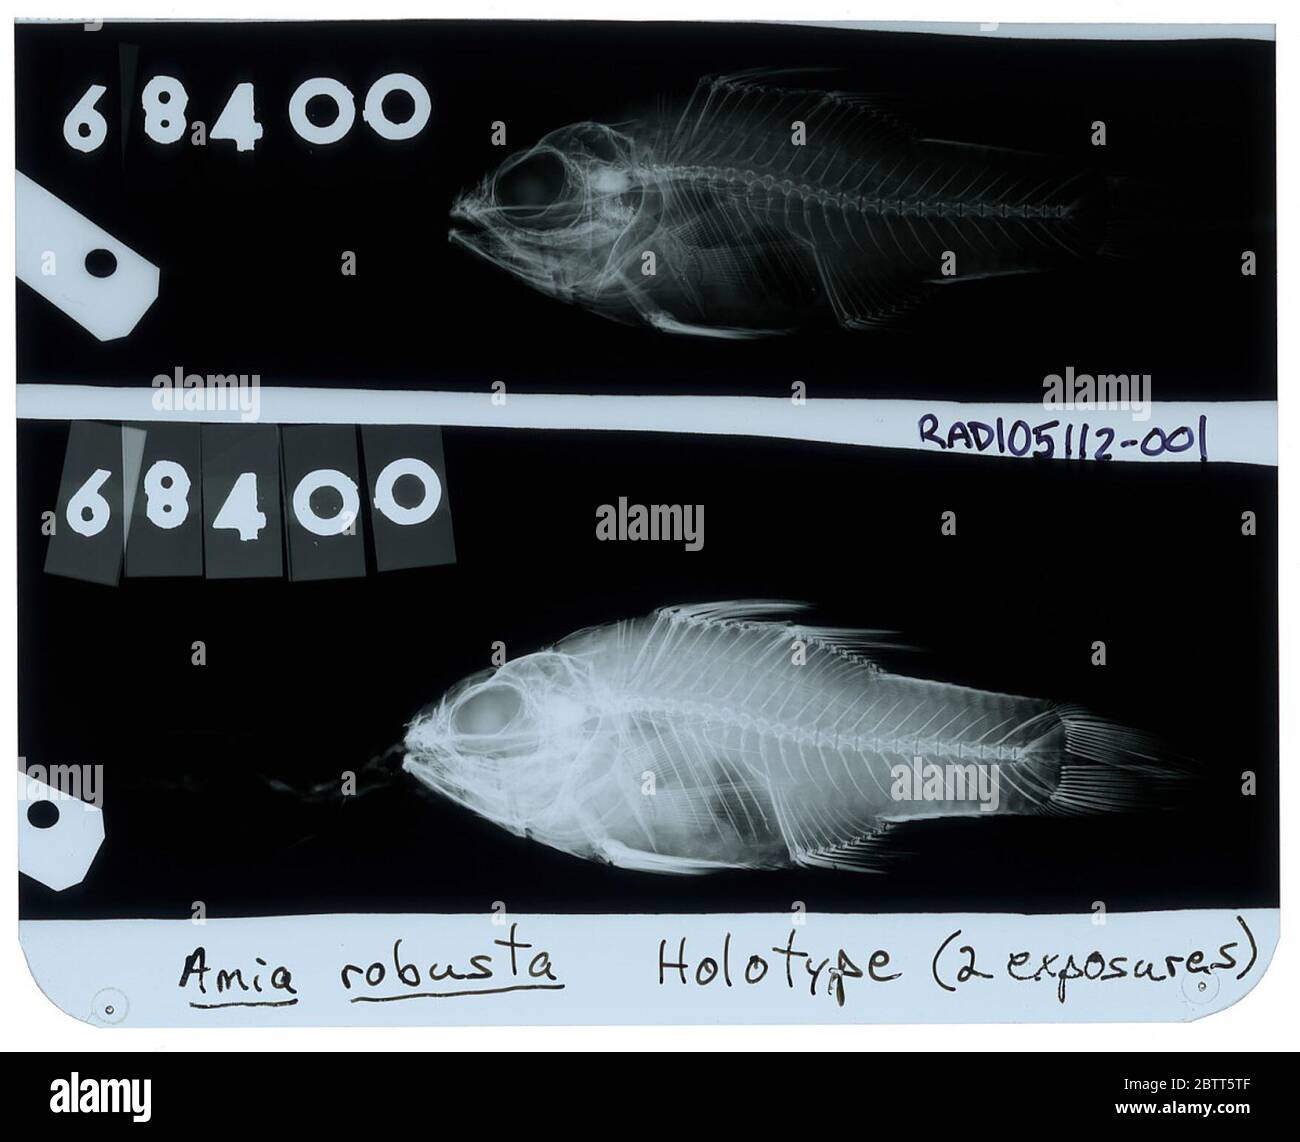 Amia robusta. Radiograph is of a type; The Smithsonian NMNH Division of Fishes uses the convention of maintaining the original species name for type specimens designated at the time of description. The currently accepted name for this species is Ostorhinchus cookii.25 Oct 20181 Stock Photo